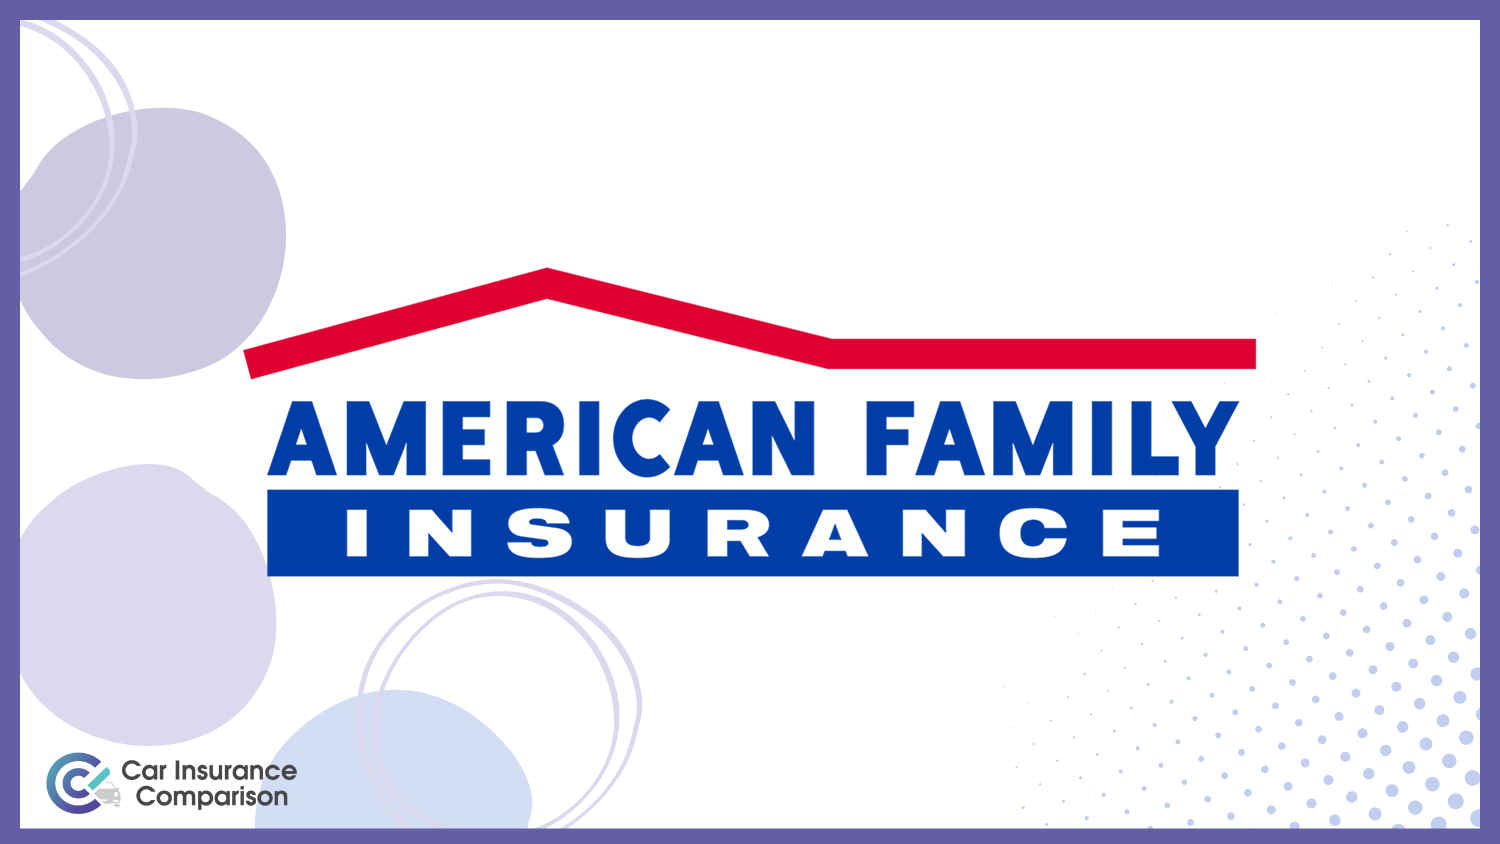 American Family: Best Car Insurance Companies That Only Look Back 3 Years